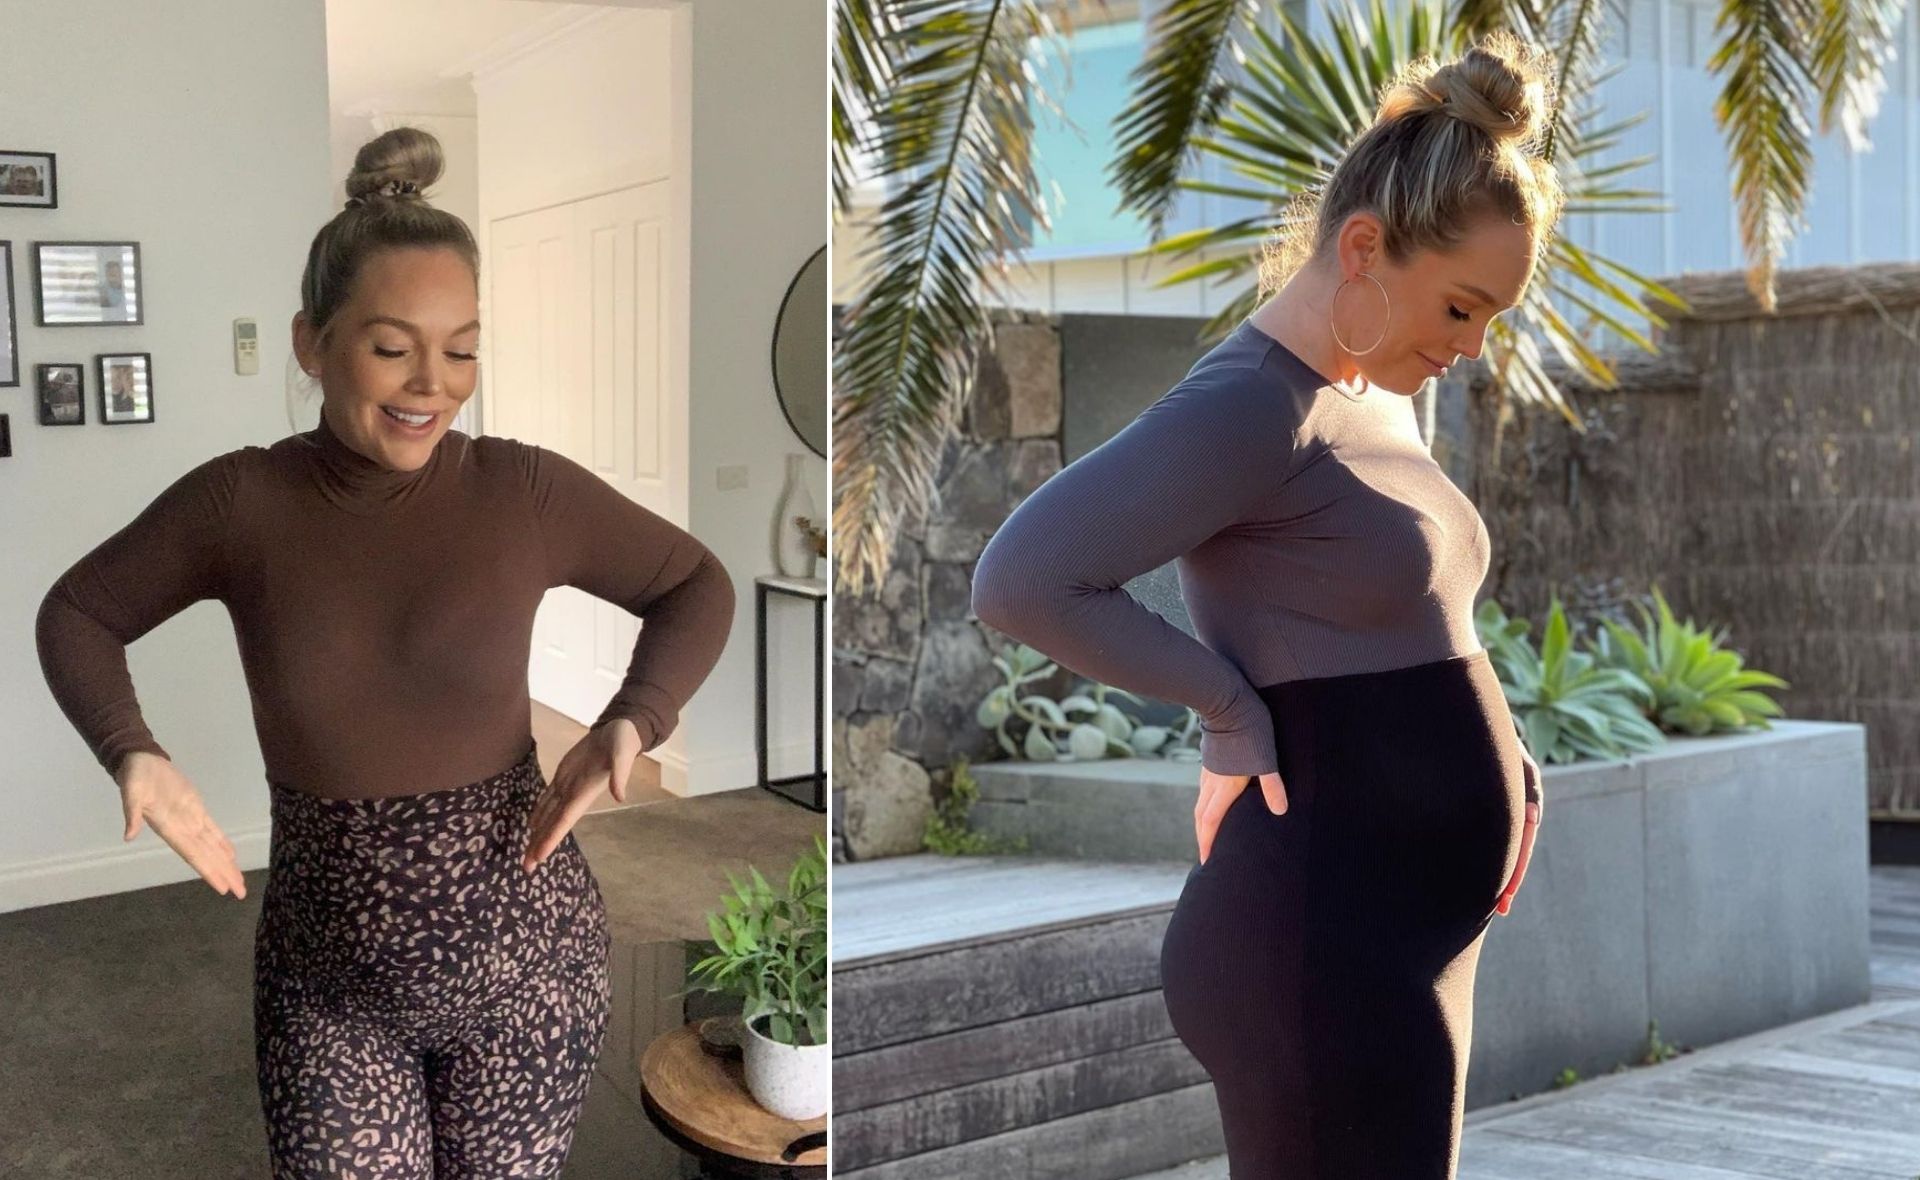 MAFS’ Melissa Rawson shares a cute pregnancy update that every mum-to-be can relate to